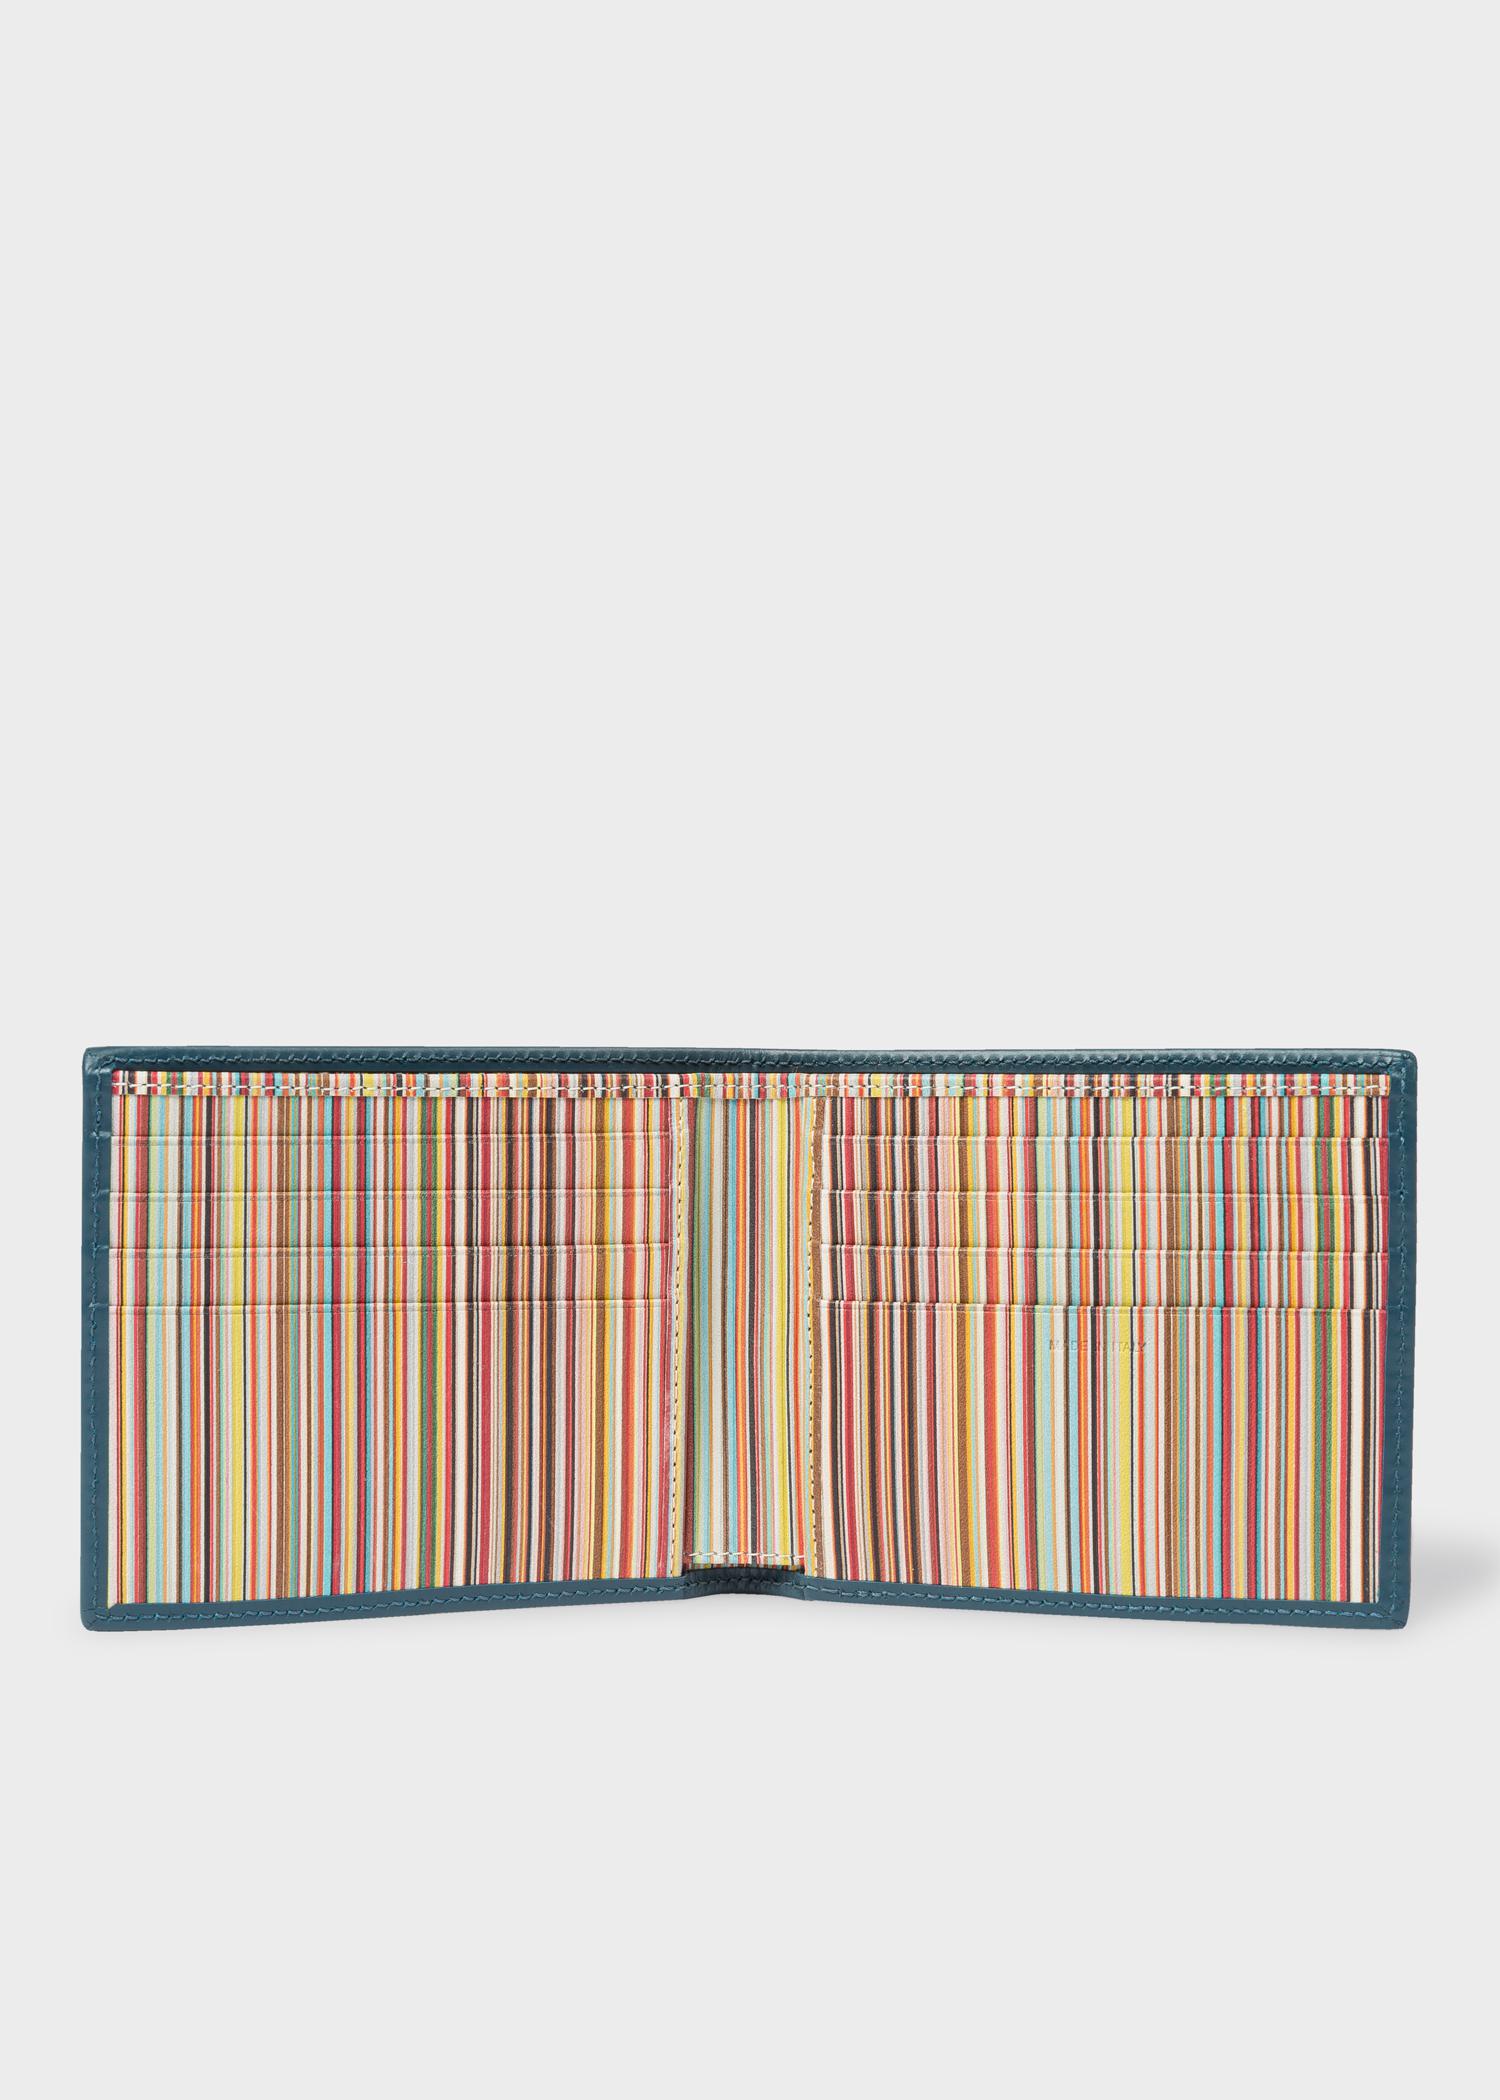 PAUL SMITH /'Signature Stripe/' Insert Teal Blue Leather COIN /& Billfold Wallet